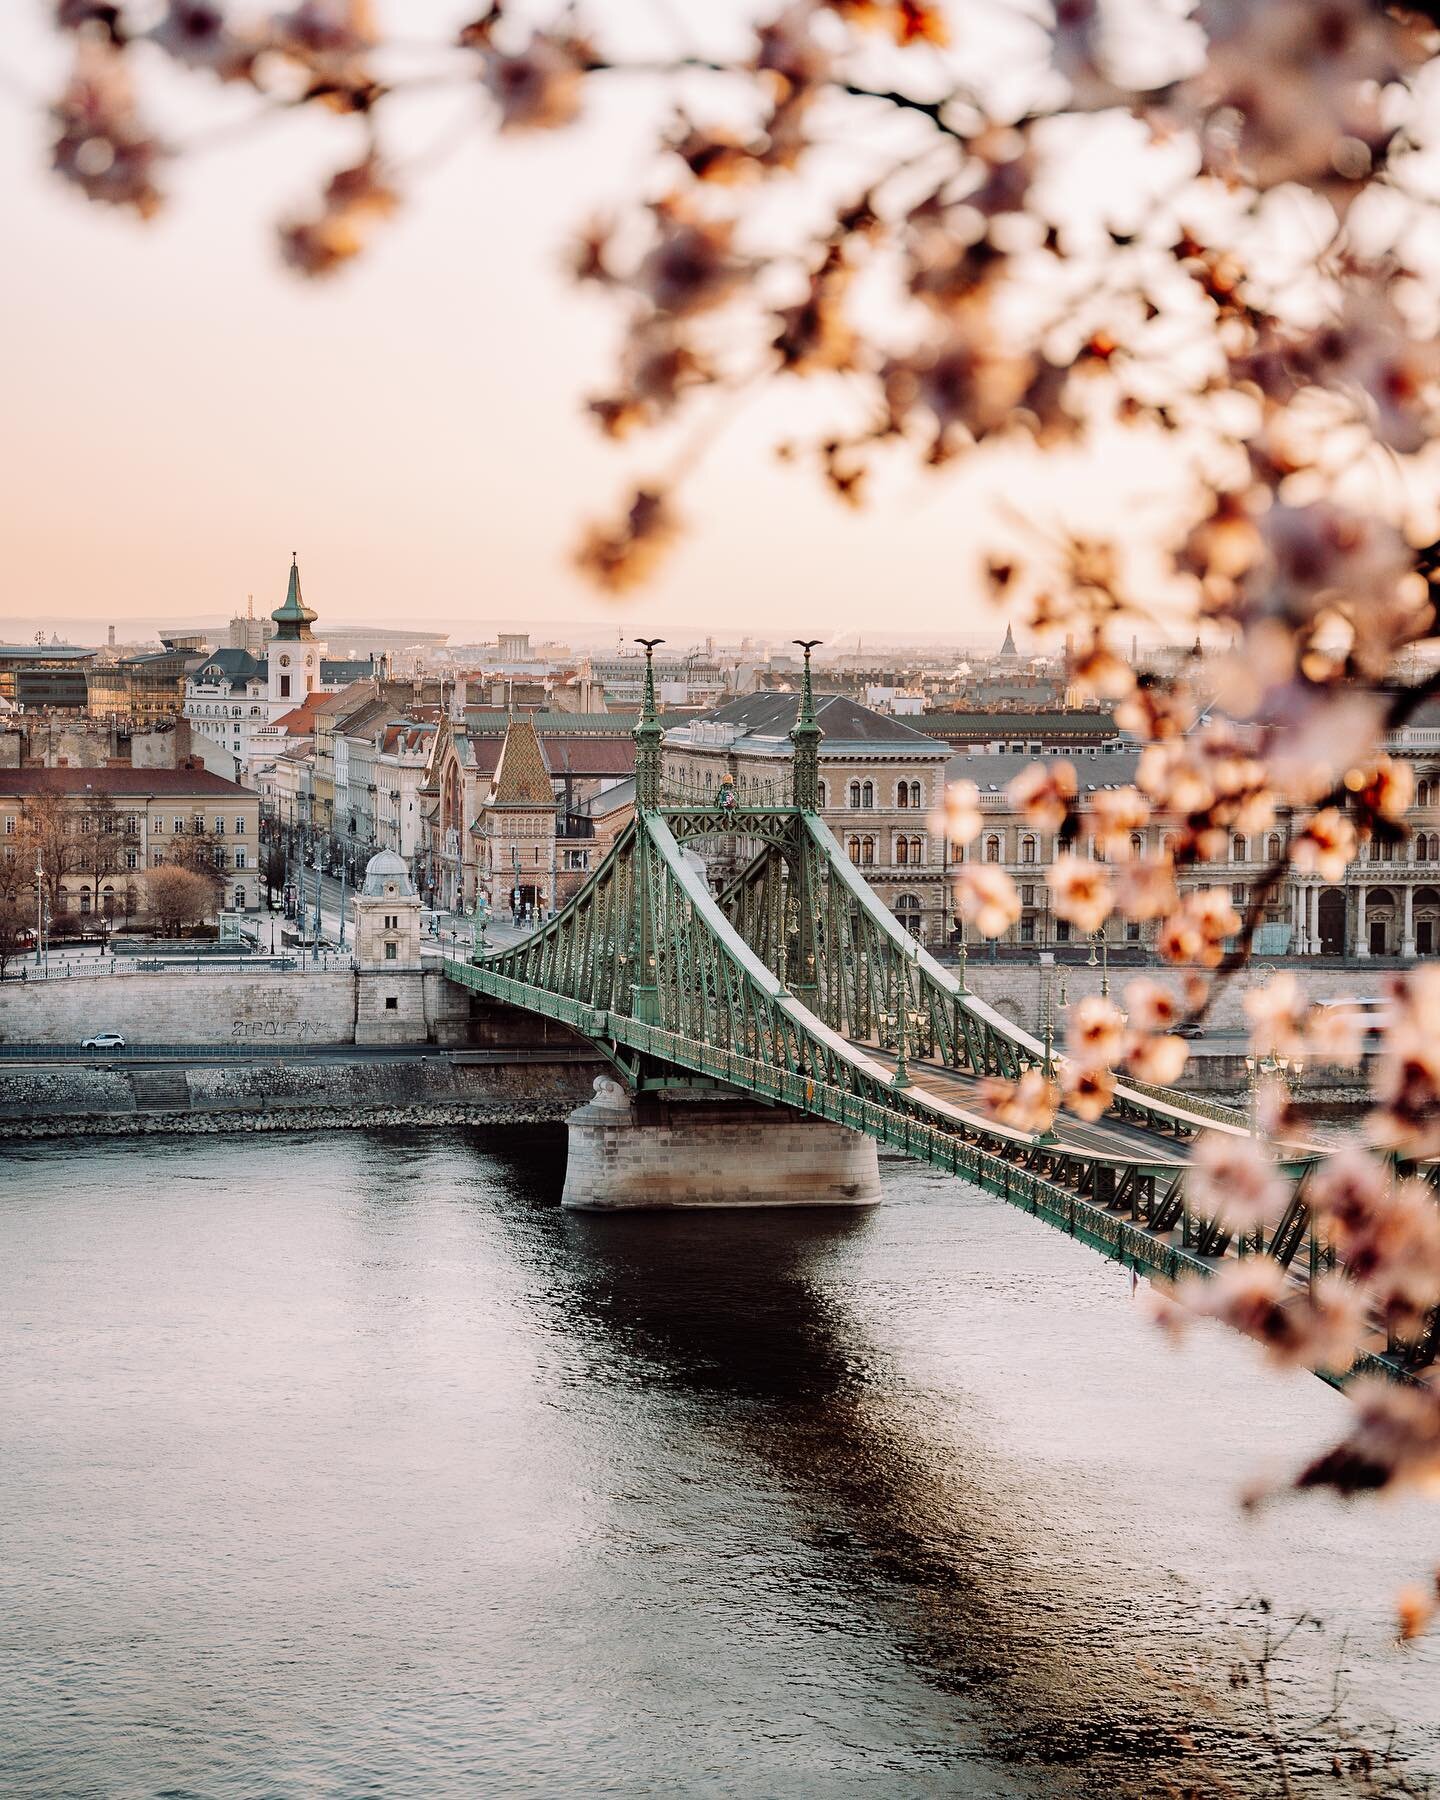 Budapest in bloom 🌸

Say hello to Budapest&rsquo;s most famous (and photographed!) tree, the almond blossom of Gellert Hill, overlooking Liberty Bridge. They only last a week or two, but ain&rsquo;t they bloody gorgeous while they&rsquo;re here?!

W